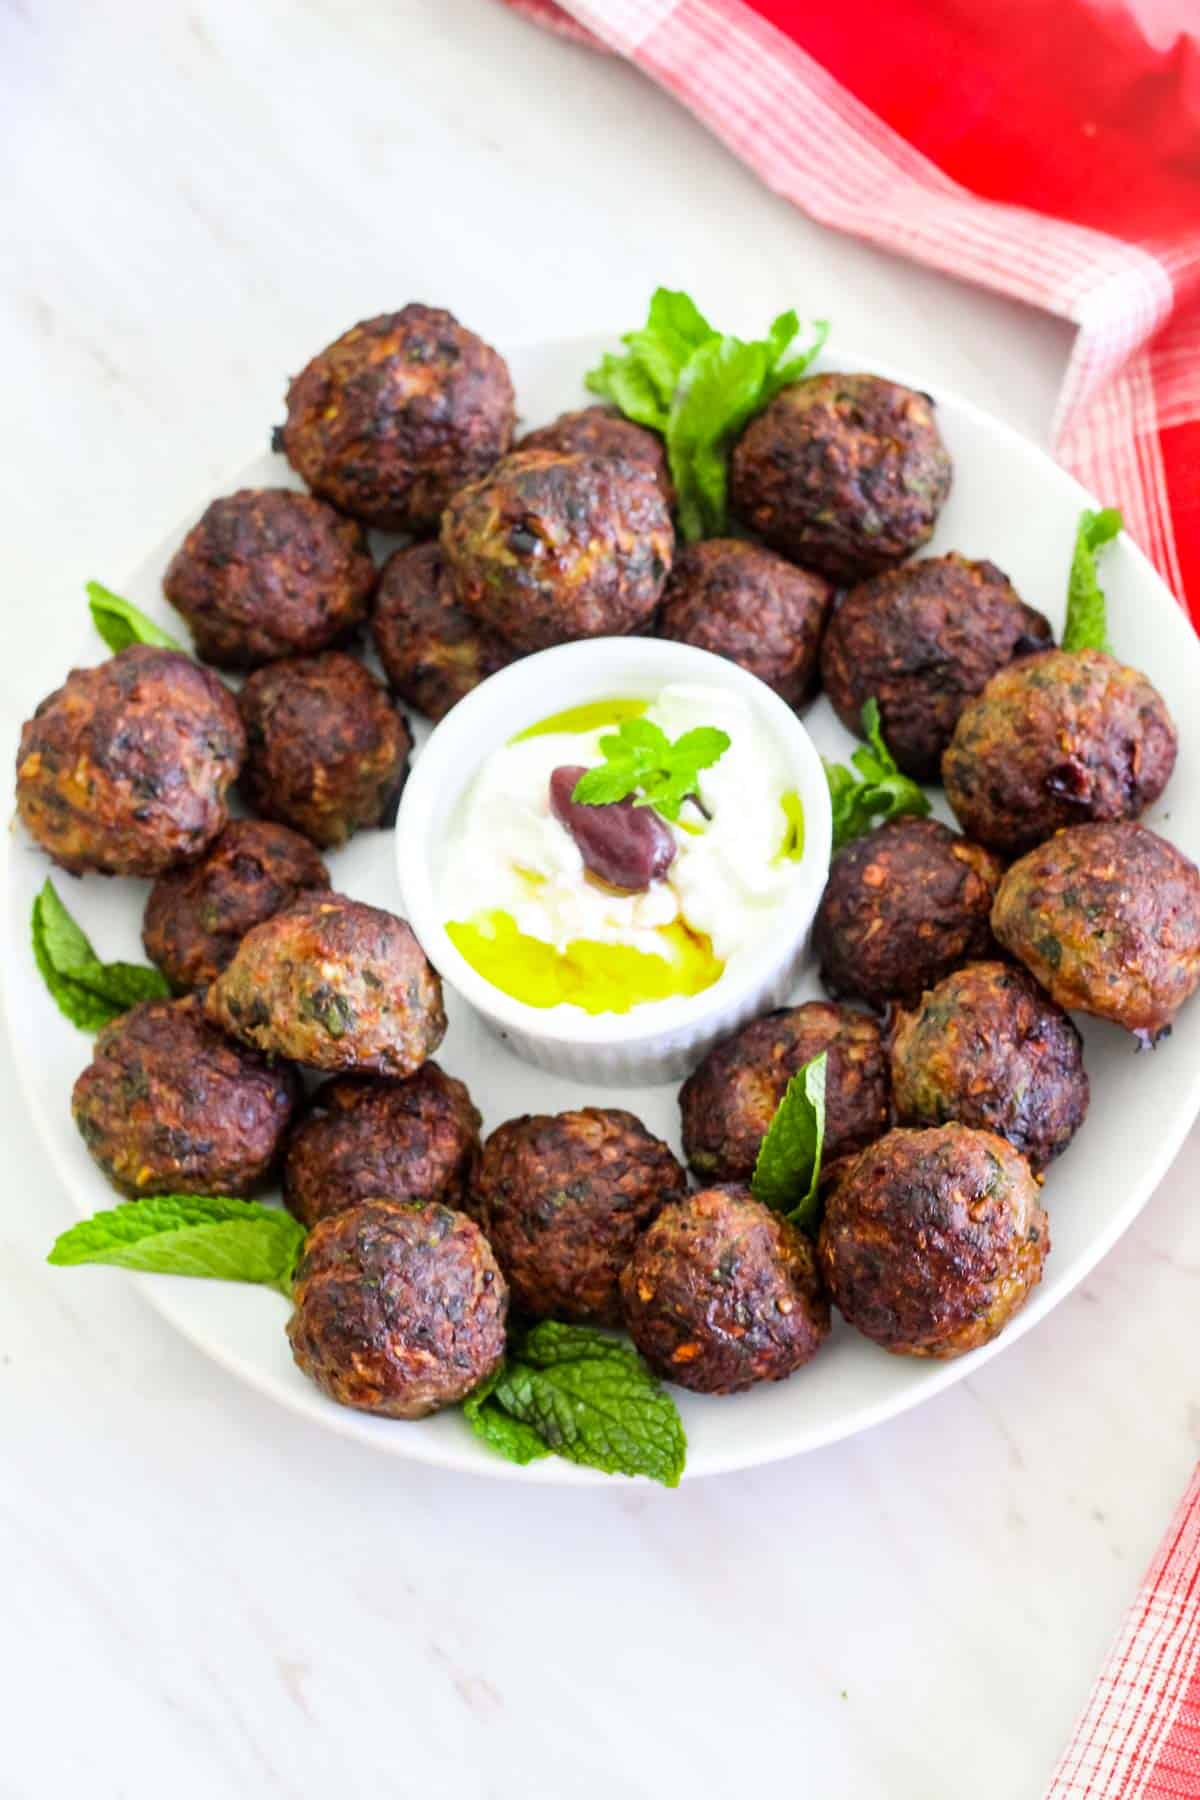 Albanian mint meatballs made with ground beef. These meatballs are called qofte and you see them served in a round platter garnished with fresh mint and a yogurt based dip.